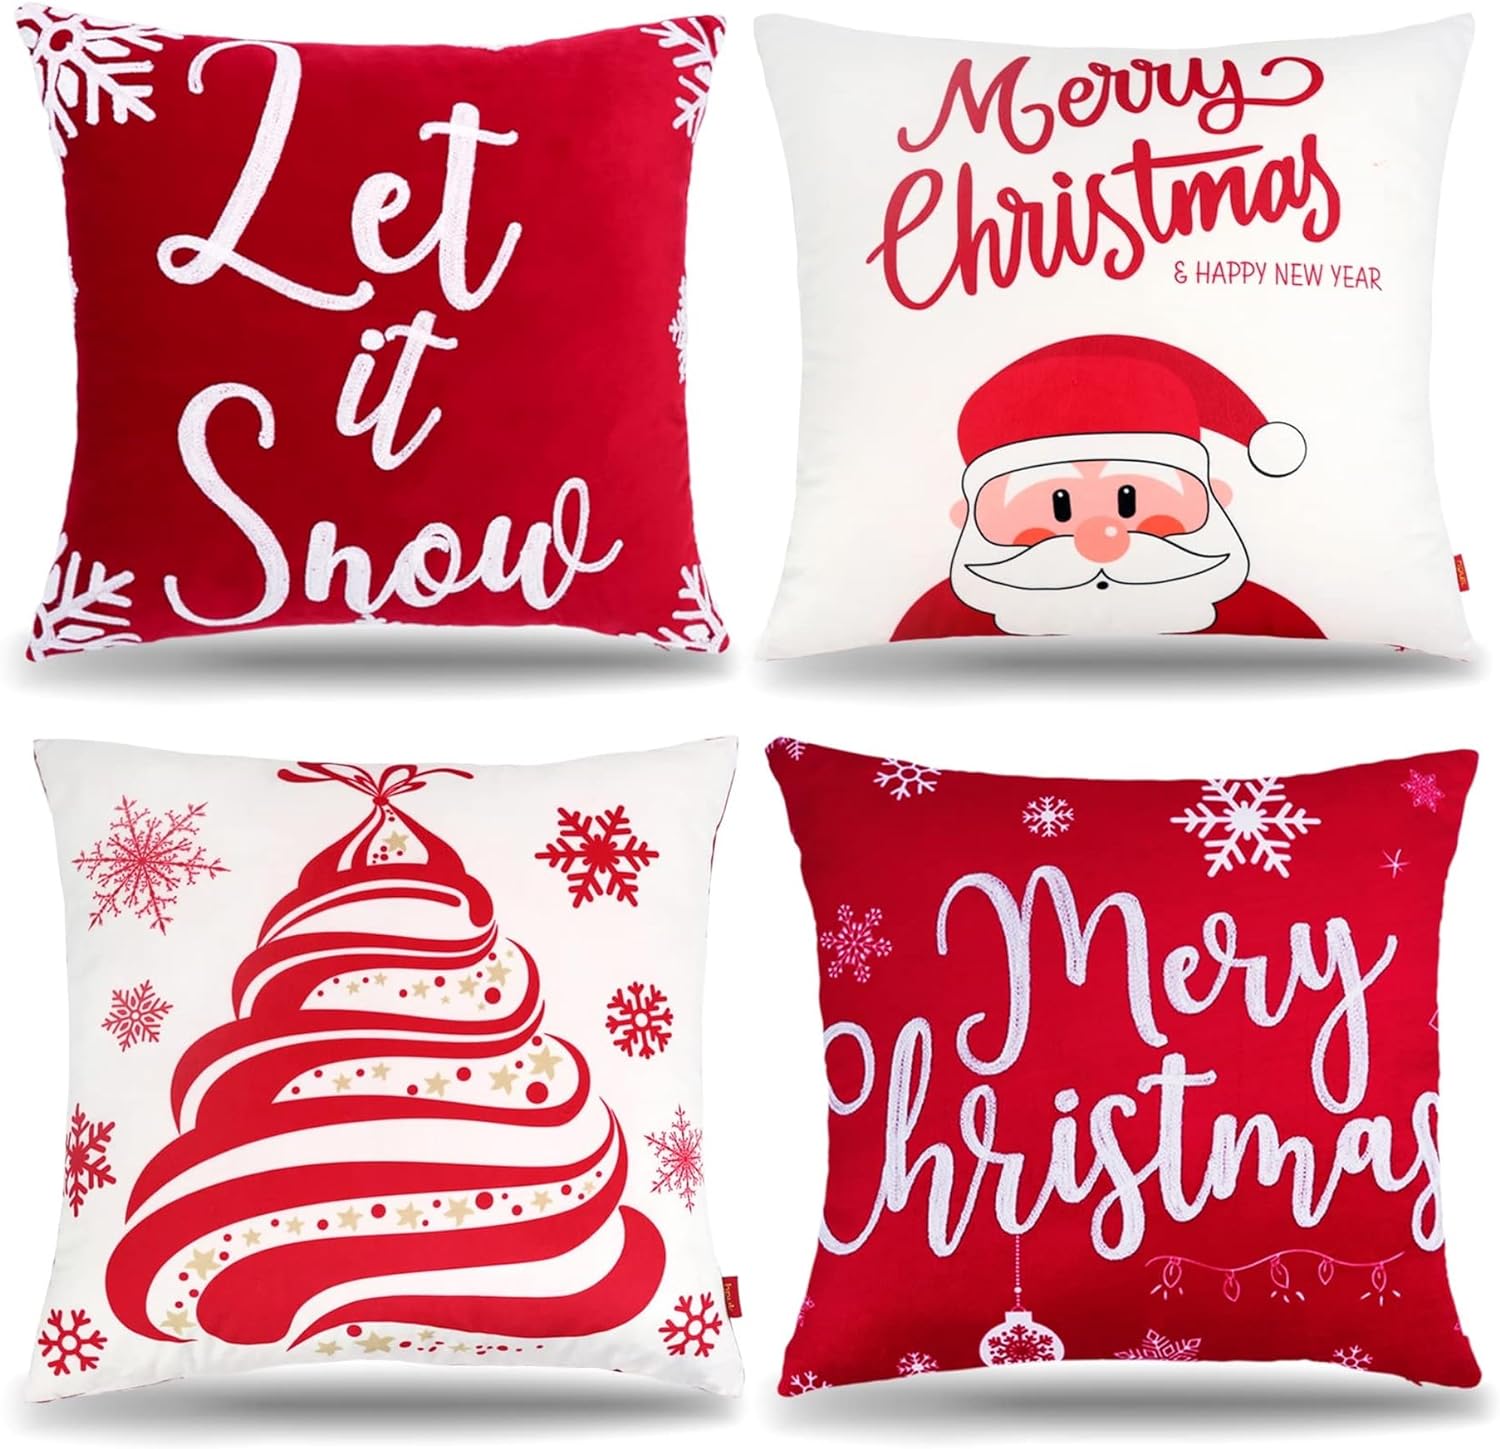 HPUK Christmas Embroidery Pillow Covers Set of 4, 18x18 inch Decorative Couch Pillows for Winter, Red and White Accent Pillow Covers for Living Room, Bedroom, Sofa, Santa Claus